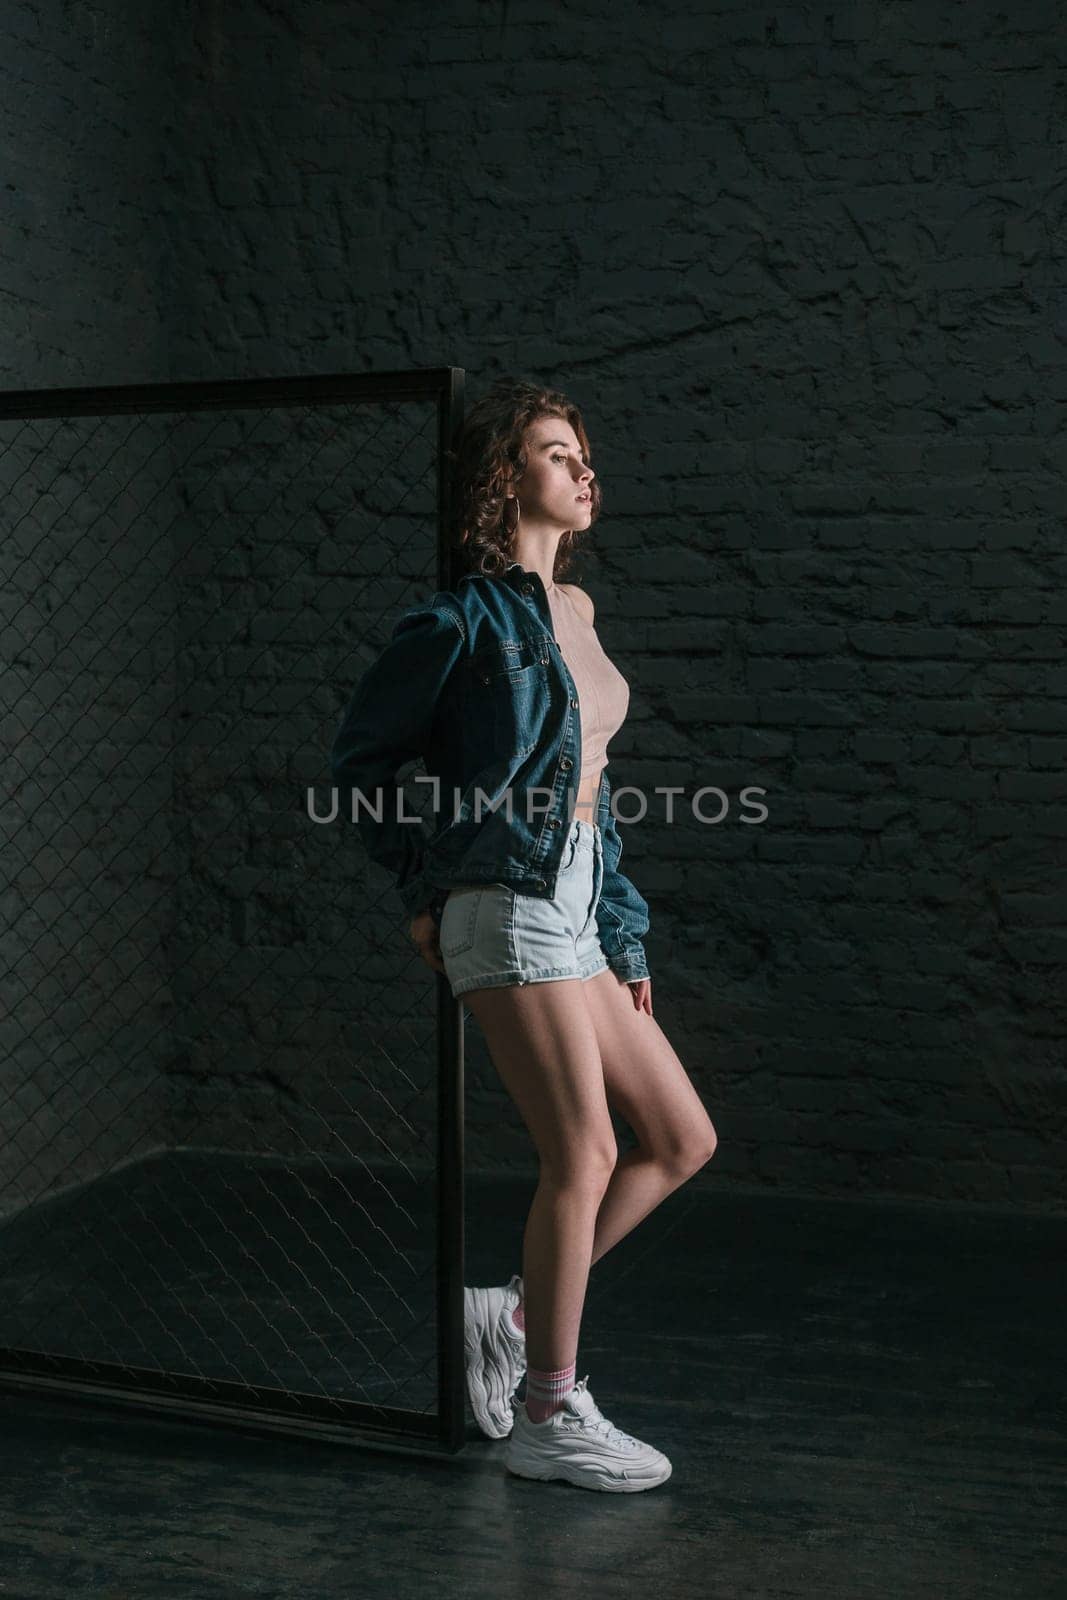 Full length profile portrait of beautiful young adult woman with wavy hair standing near fence on dark brick wall background, looking away with serious expression. Indoor studio shot.